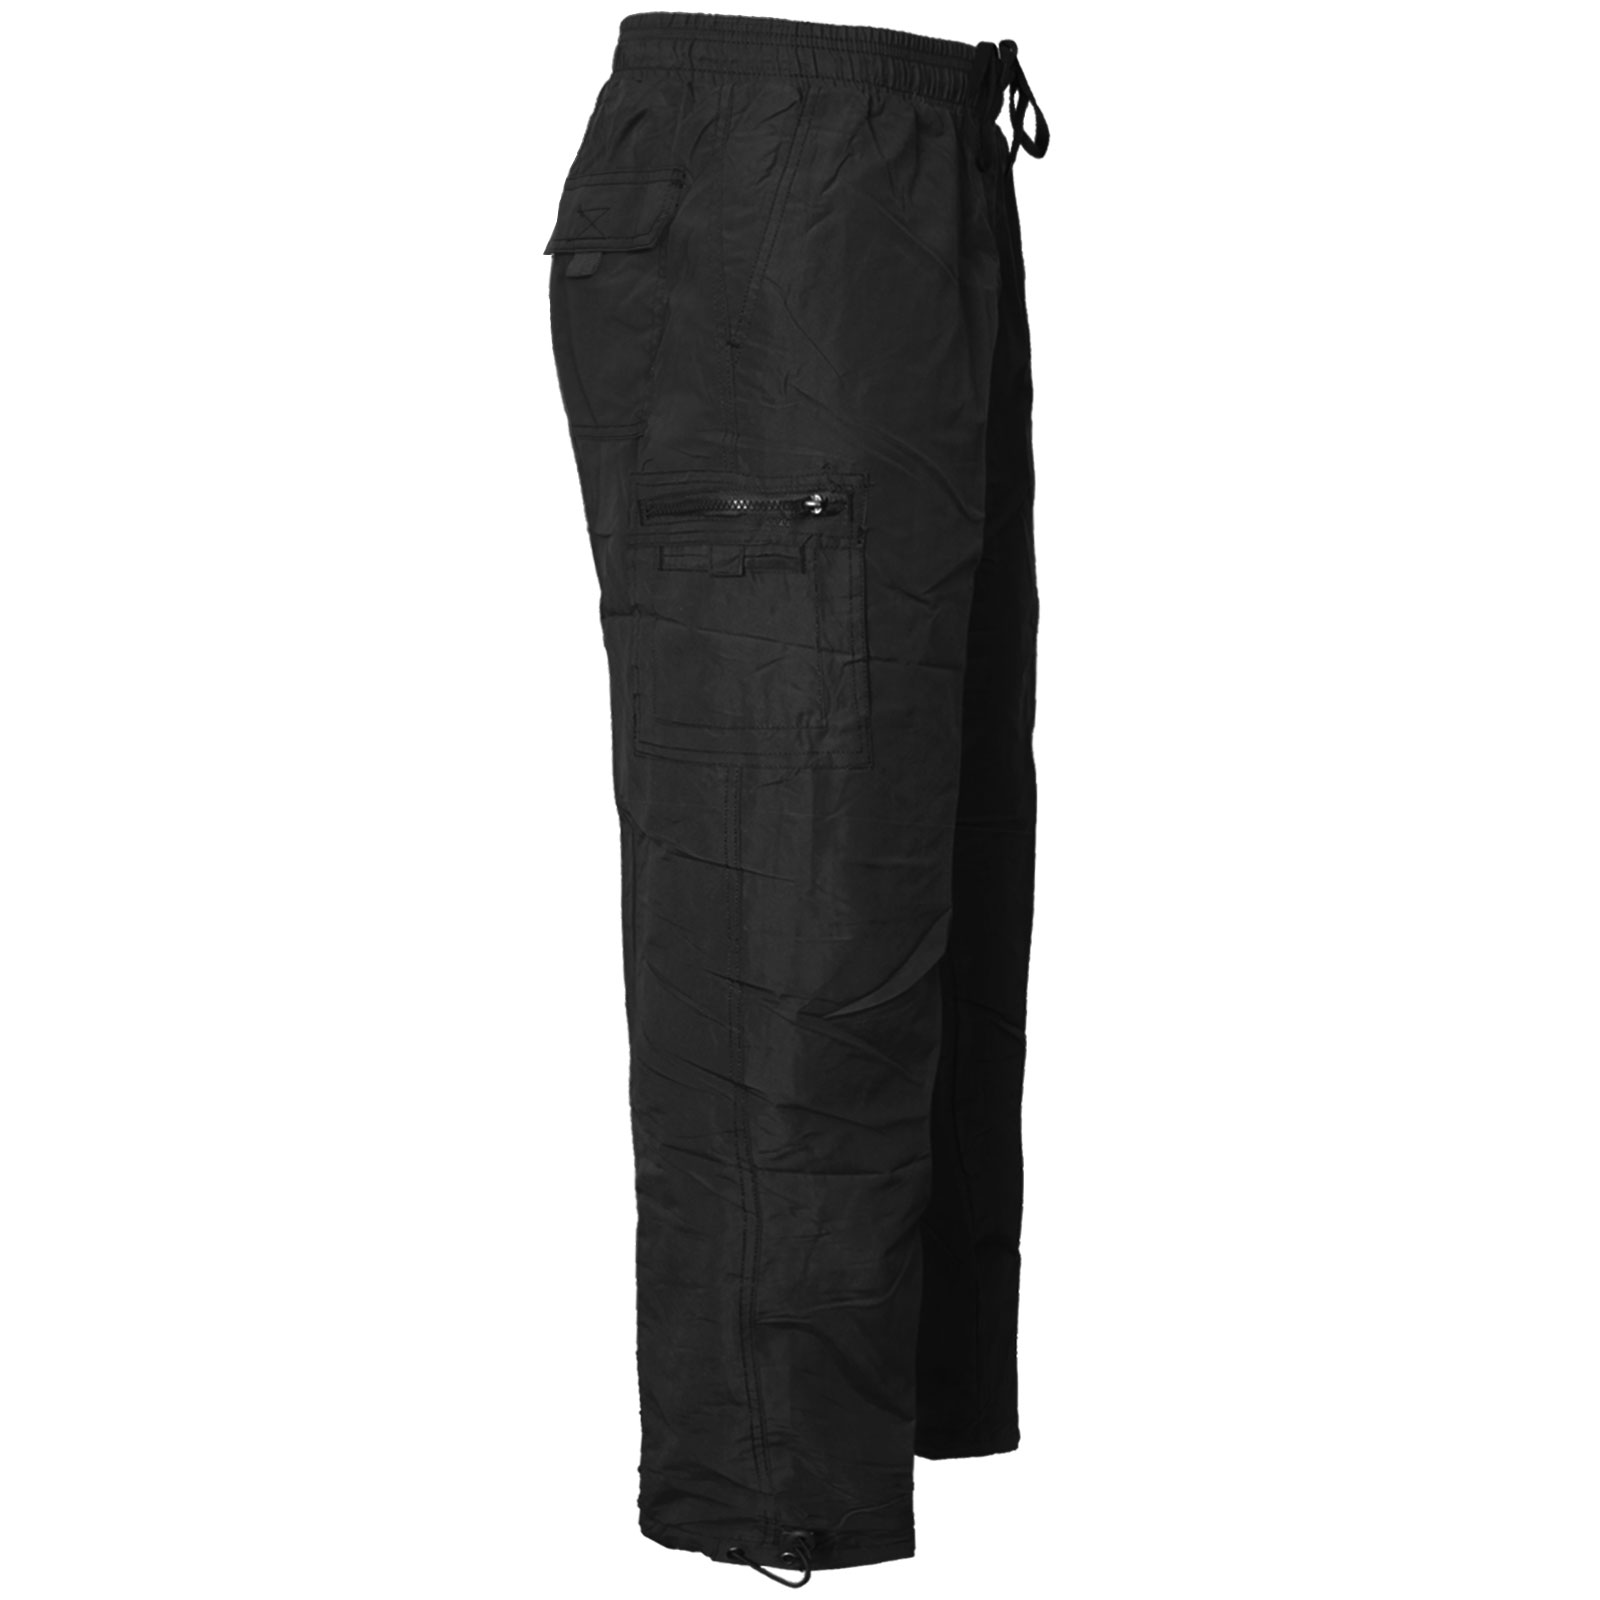 Mens Elasticated Thermal Fleece Lined Cargo Combat Work Trousers Pants Bottoms 